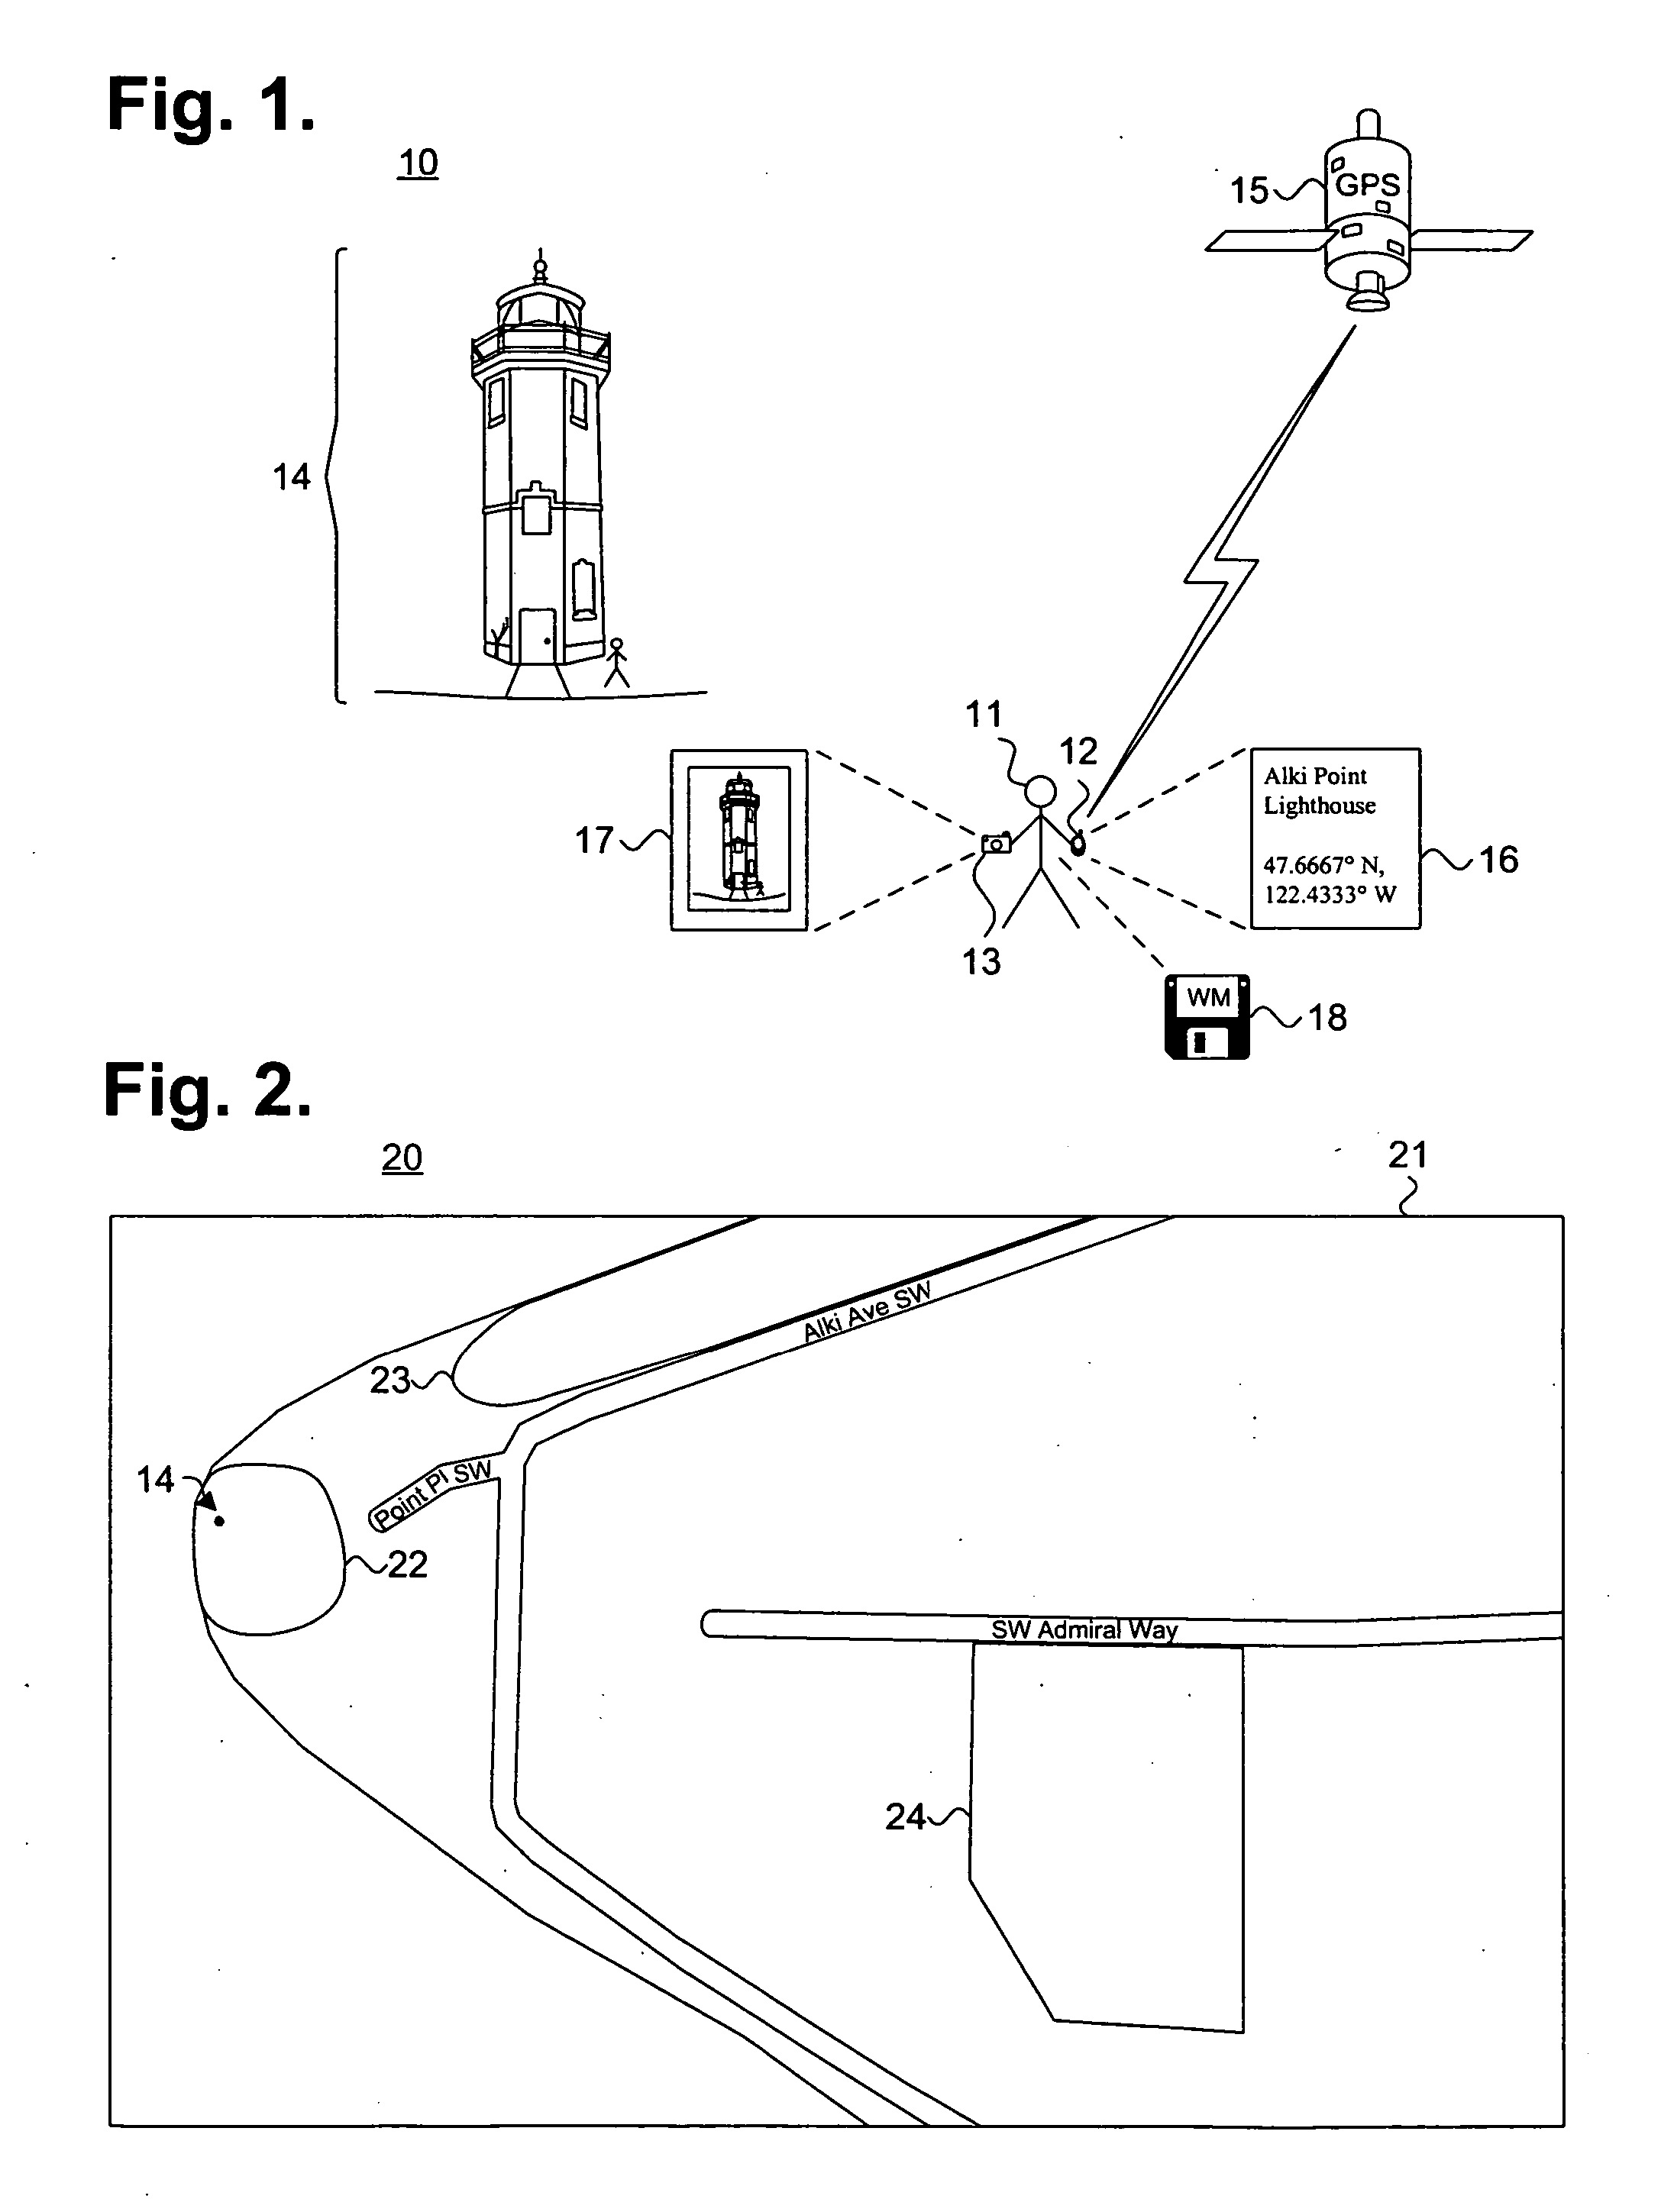 System and method for facilitating ad hoc compilation of geospatial data for on-line collaboration